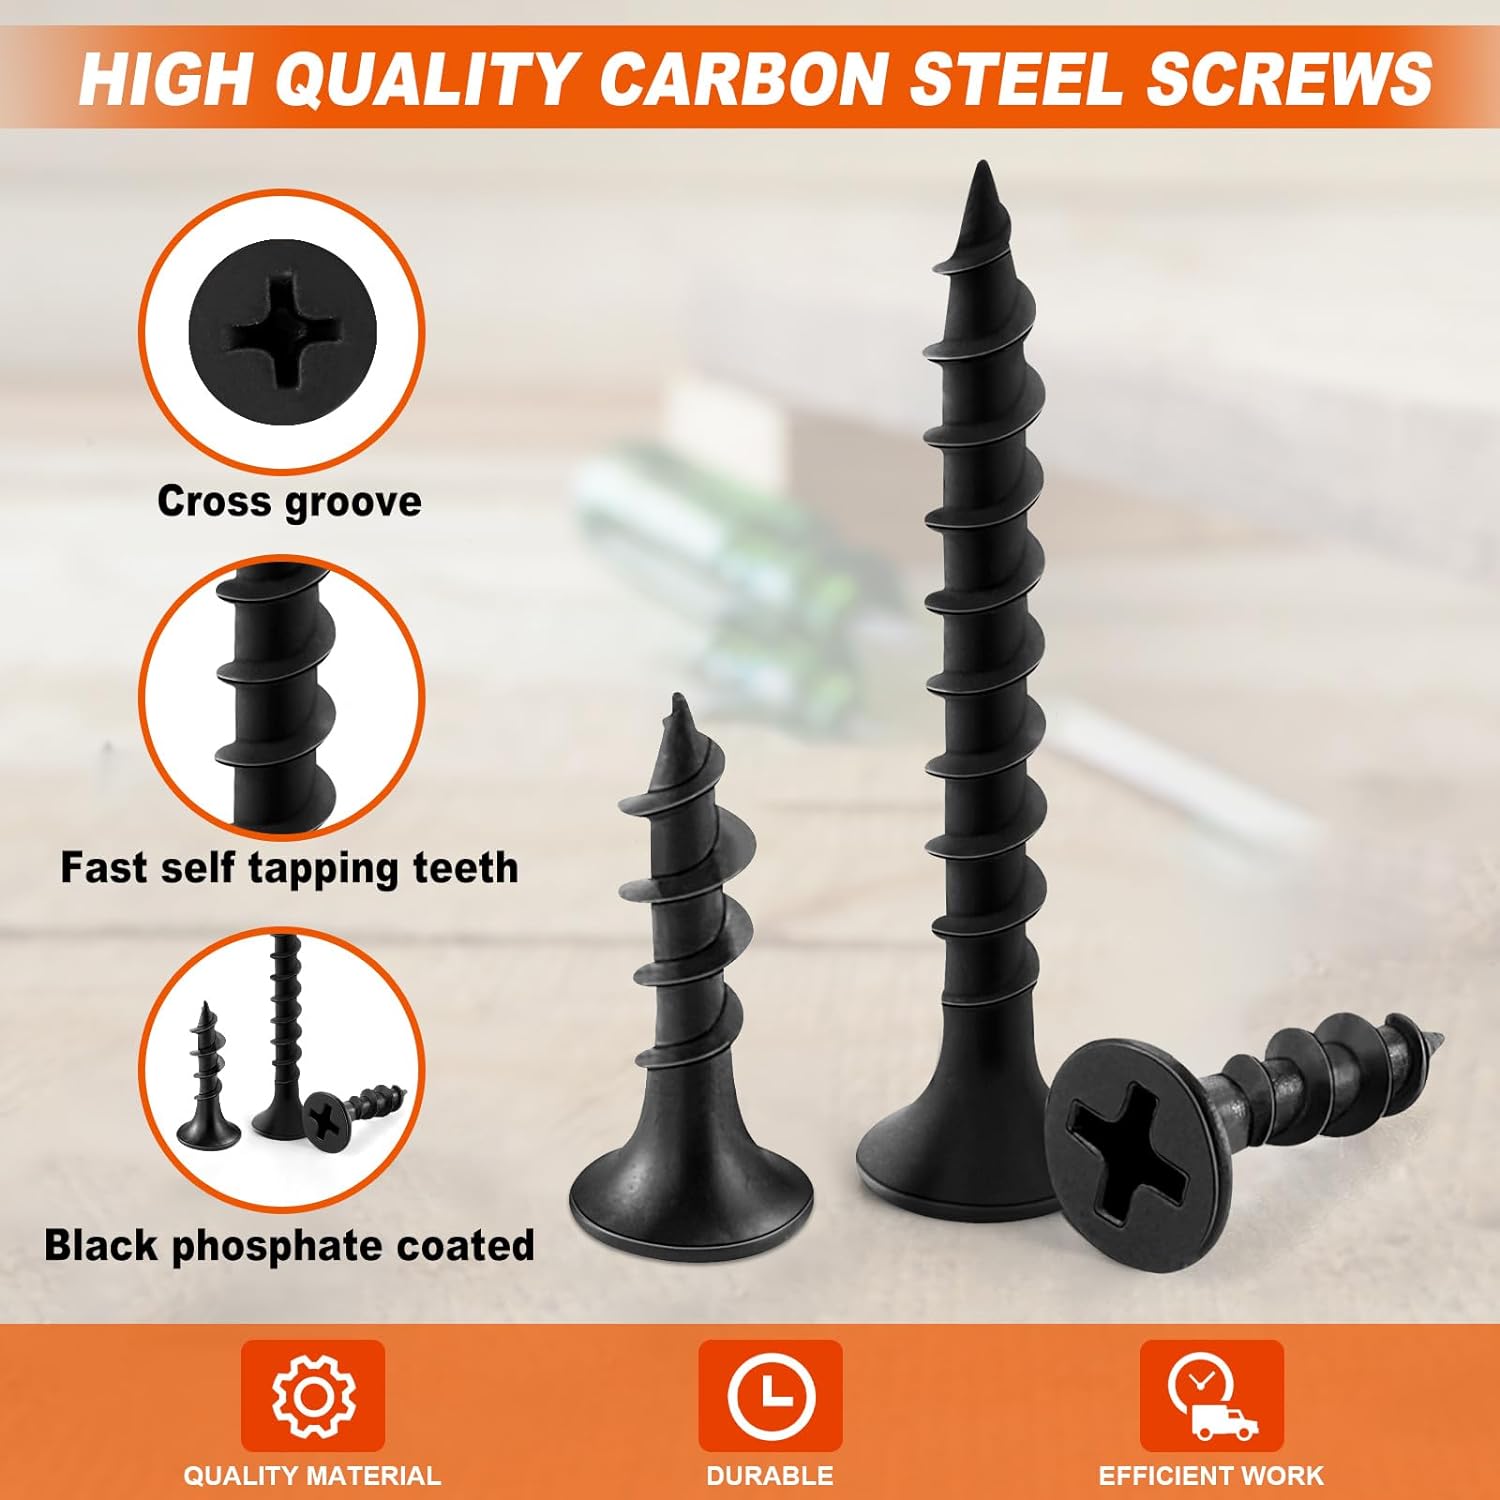 MDF board screws are specifically designed for fastening medium-density fiberboard (MDF) to wood or other materials. These screws are engineered to provide a secure and reliable grip in the dense MDF material without causing splitting or damage. They typically feature a fine thread and a sharp point to facilitate easy penetration and a strong hold. MDF board screws are commonly used in woodworking and carpentry projects, including furniture assembly, cabinet installation, and other applications where a sturdy and durable connection to MDF board is essential.